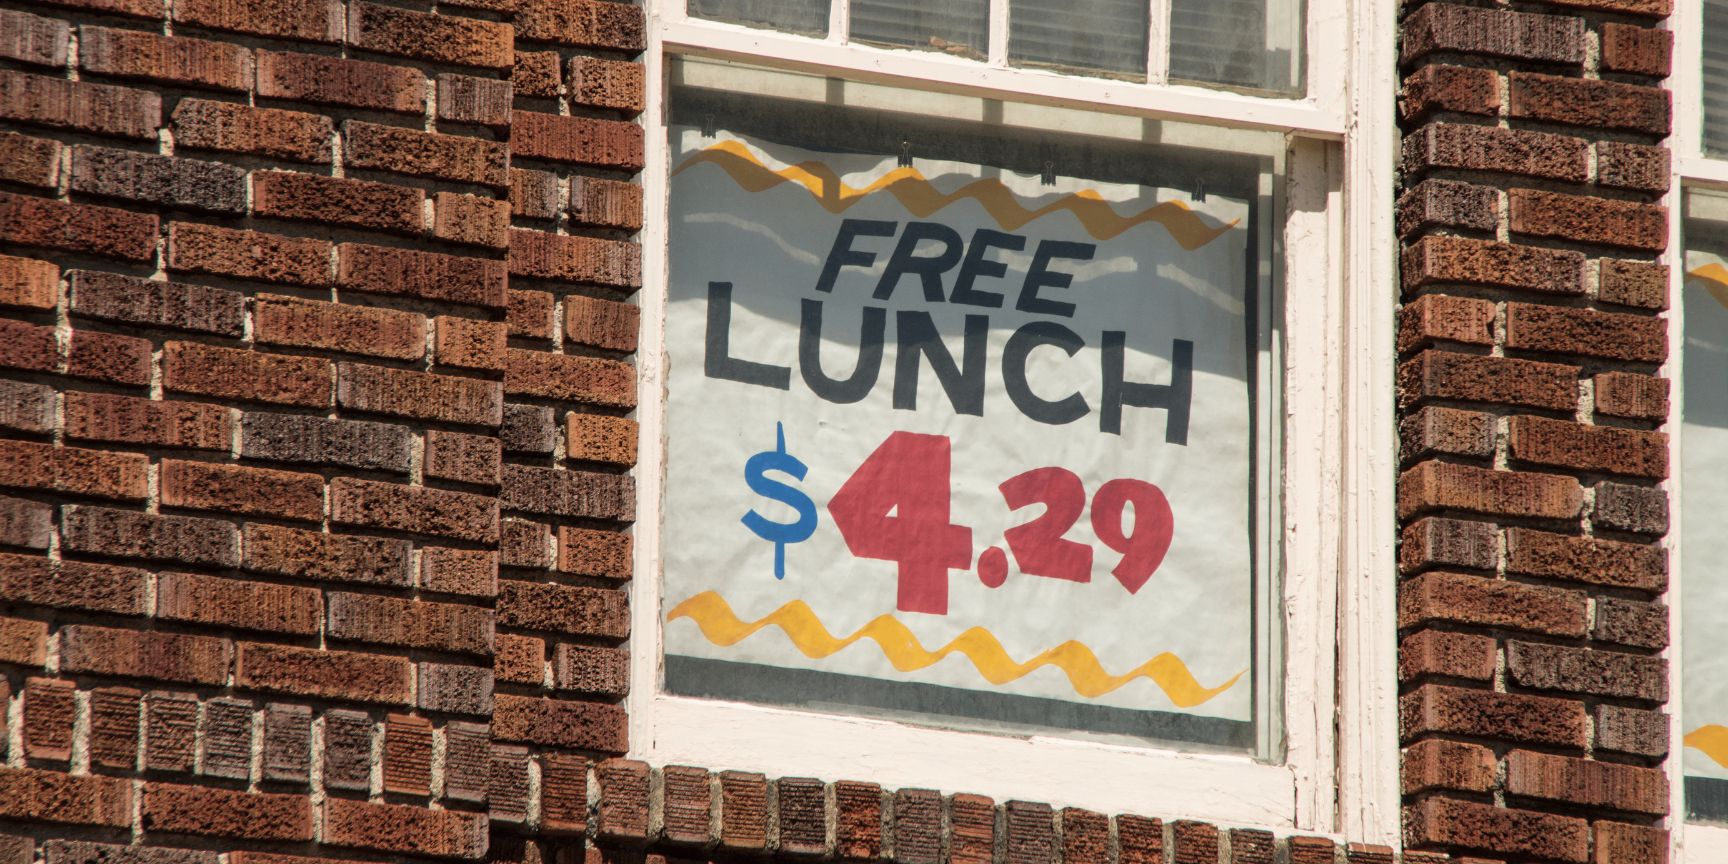 Free Lunch Sign for Four Dollars and Twenty-Nine Cents